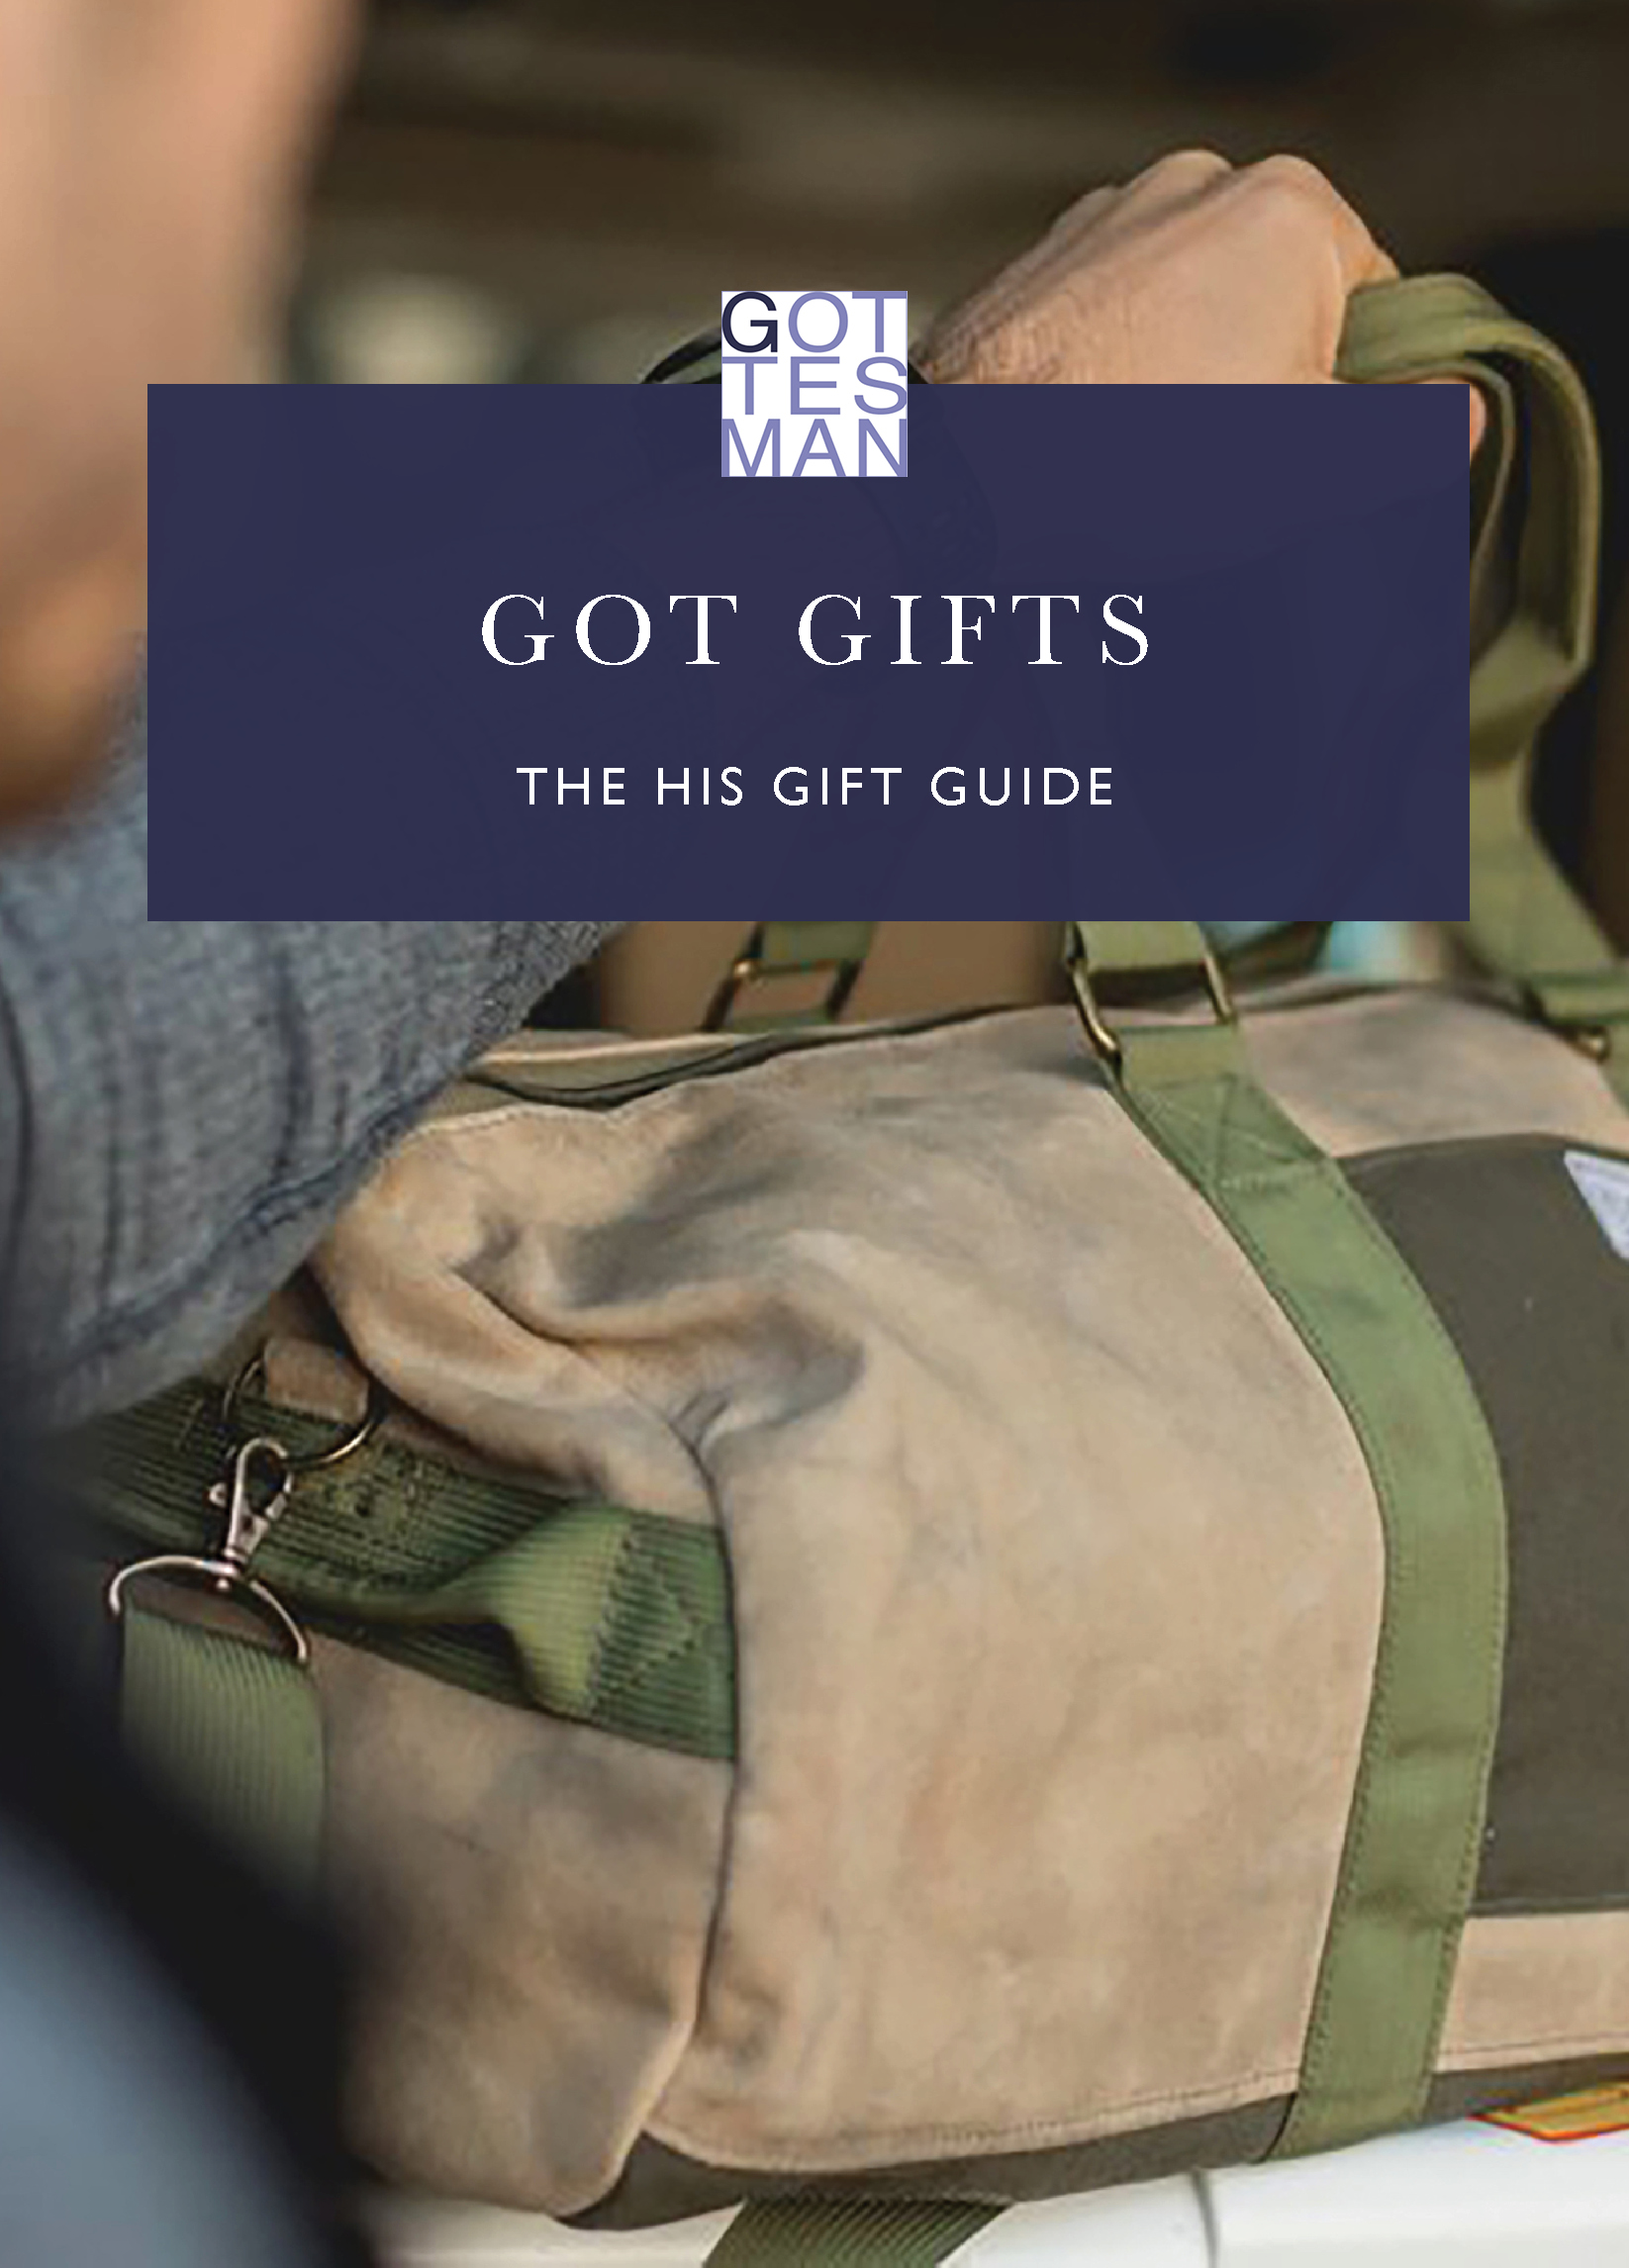 "Got Gifts: The His Gift Guide"